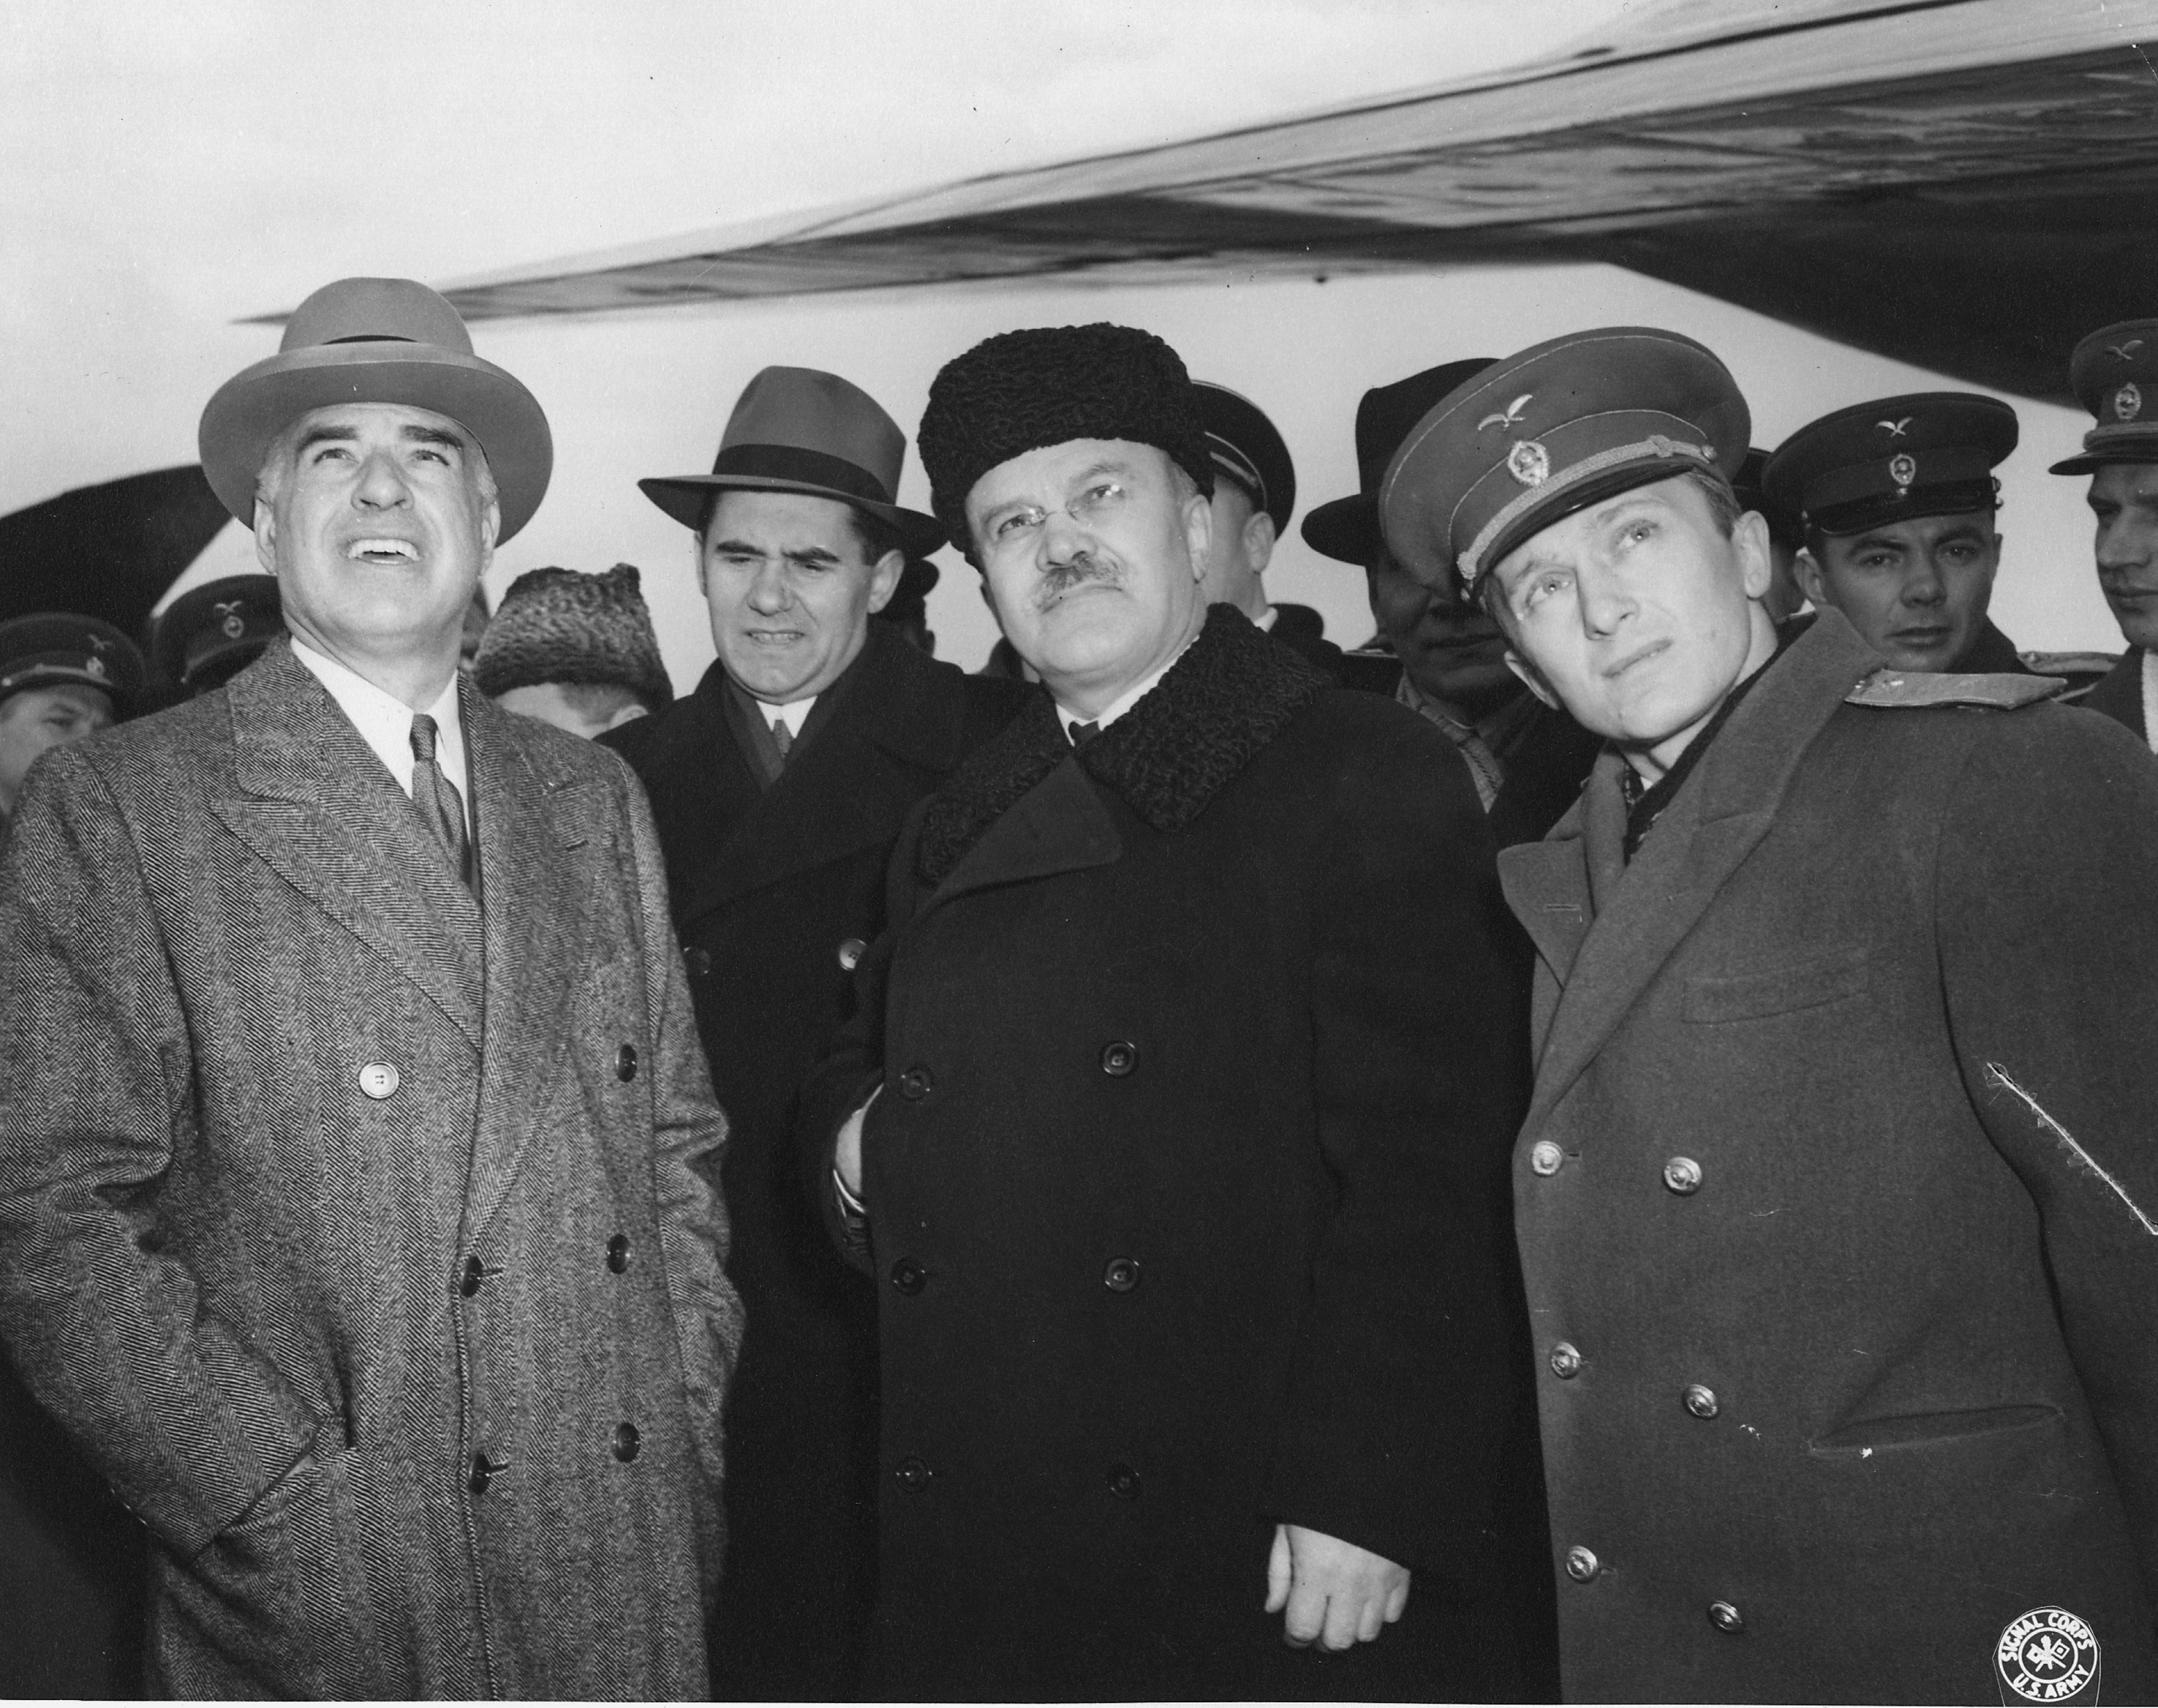 US Secretary of State Edward Stettinius, Jr., Soviet diplomat Andrei Gromyko, and Soviet Foreign Minister Vyacheslav Molotov scanning the sky for the arrival of US President Franklin Roosevelt's aircraft, Crimea, Russia (now Ukraine), 3 Feb 1945